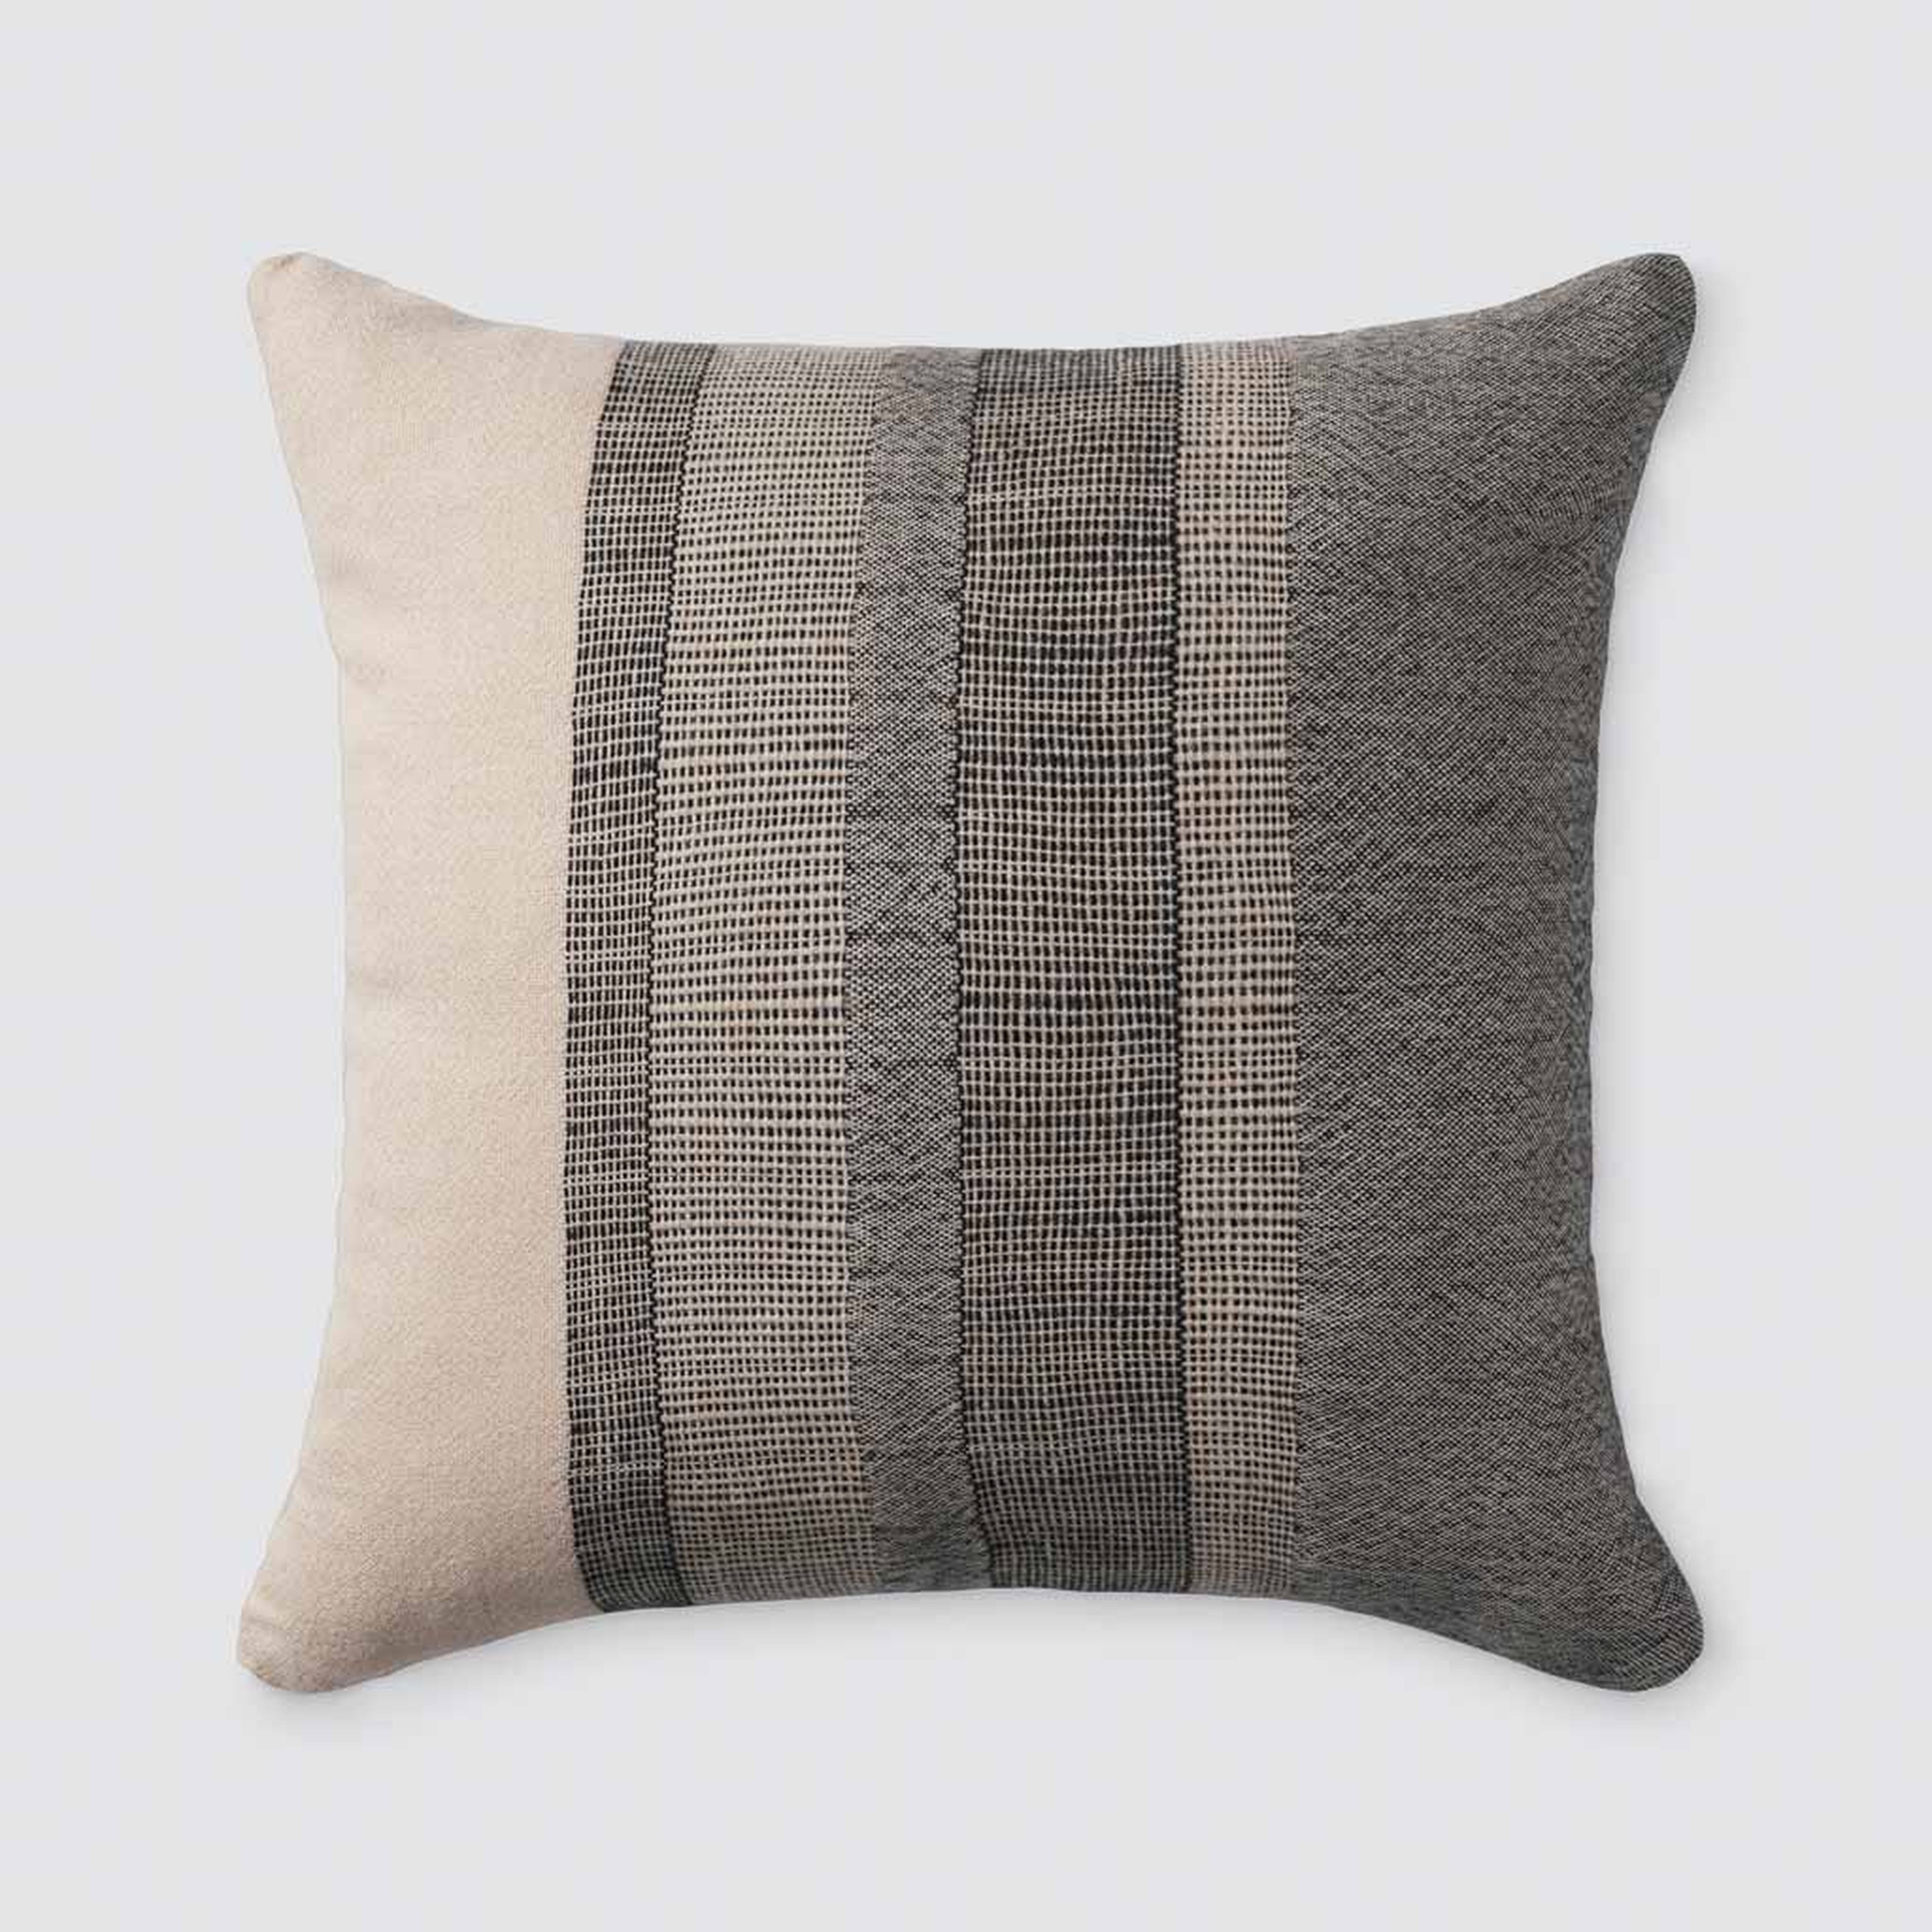 La Puerta Pillow - Tan By The Citizenry - The Citizenry